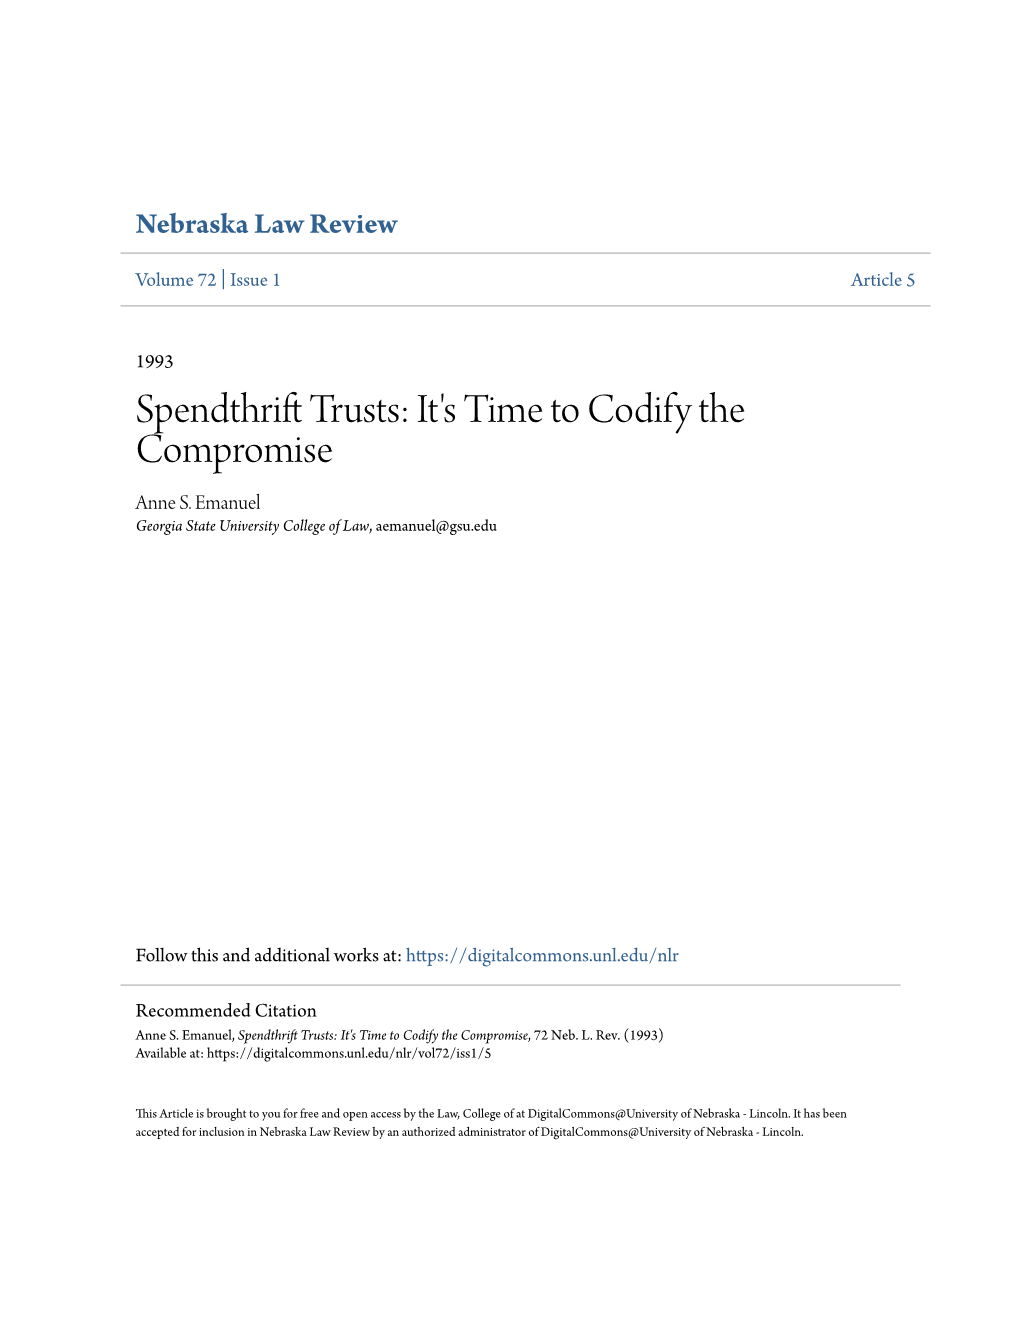 Spendthrift Trusts: It's Time to Codify the Compromise